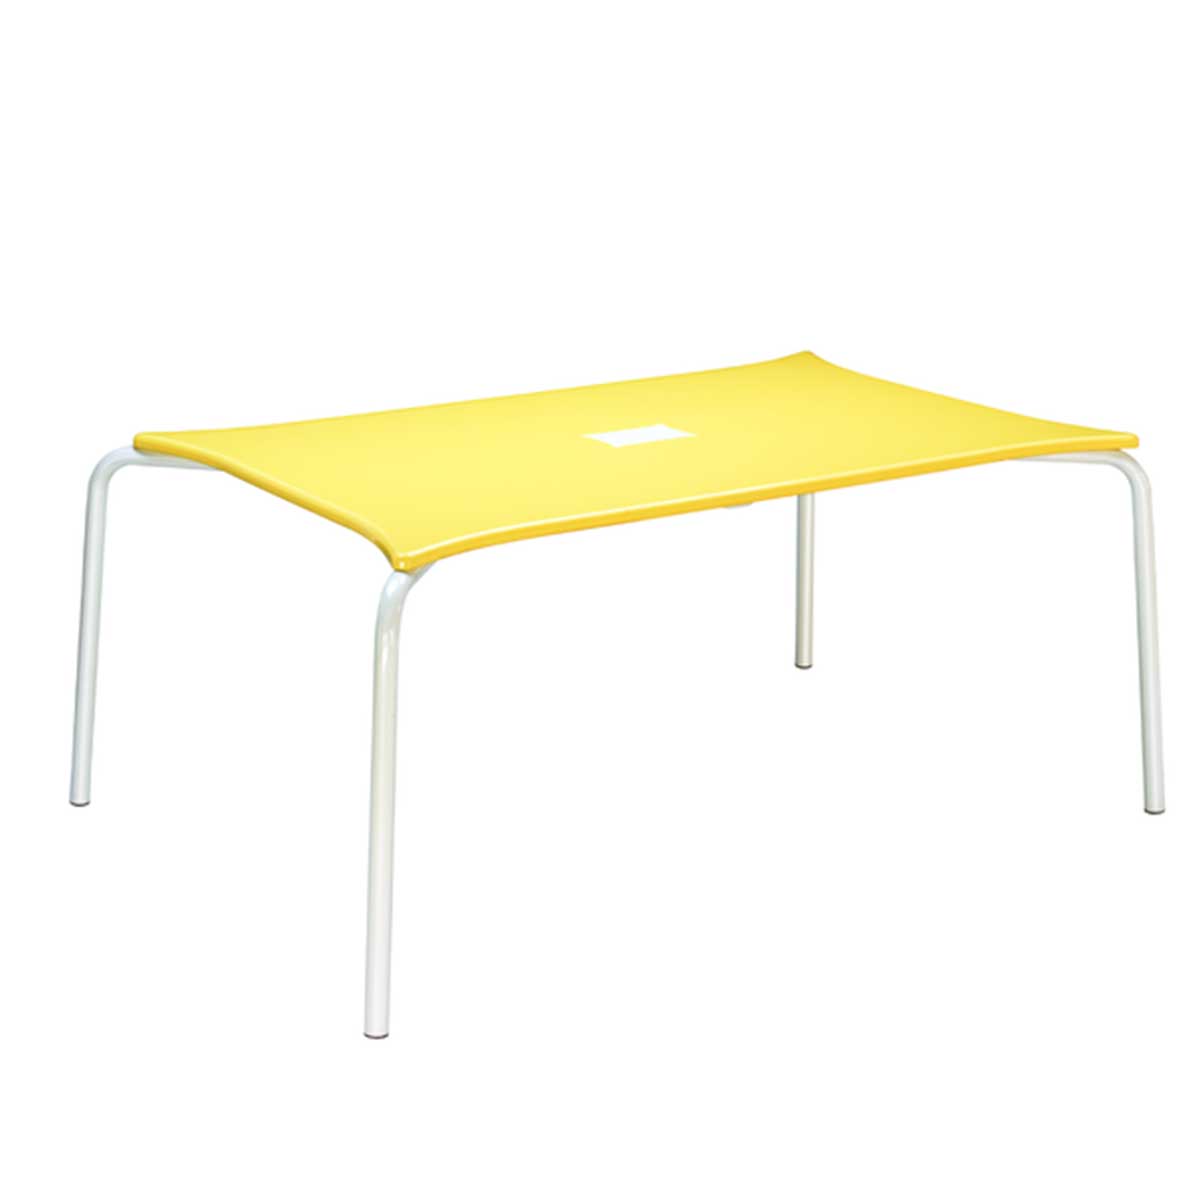 Cafeteria Table Manufacturers, Suppliers in Kalindi Kunj